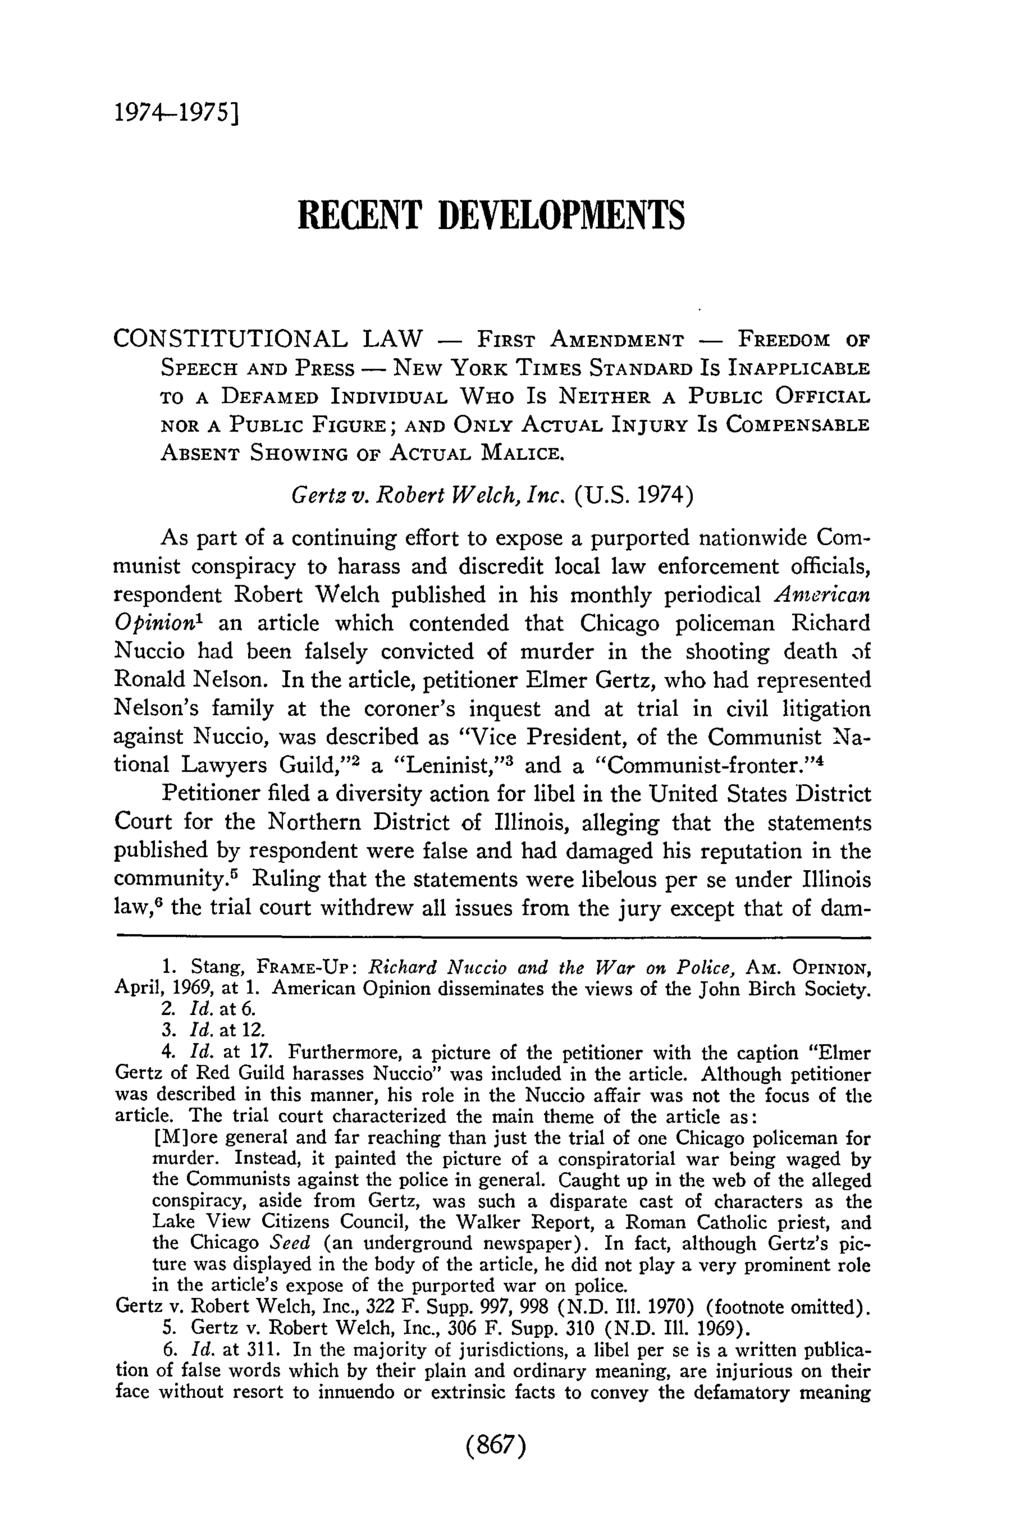 1974-1975] Molchen: Constitutional Law - First Amendment - Freedom of Speech and Pres RECENT DEVELOPMENTS CONSTITUTIONAL LAW - FIRST AMENDMENT - FREEDOM OF SPEECH AND PRESS - NEW YORK TIMES STANDARD